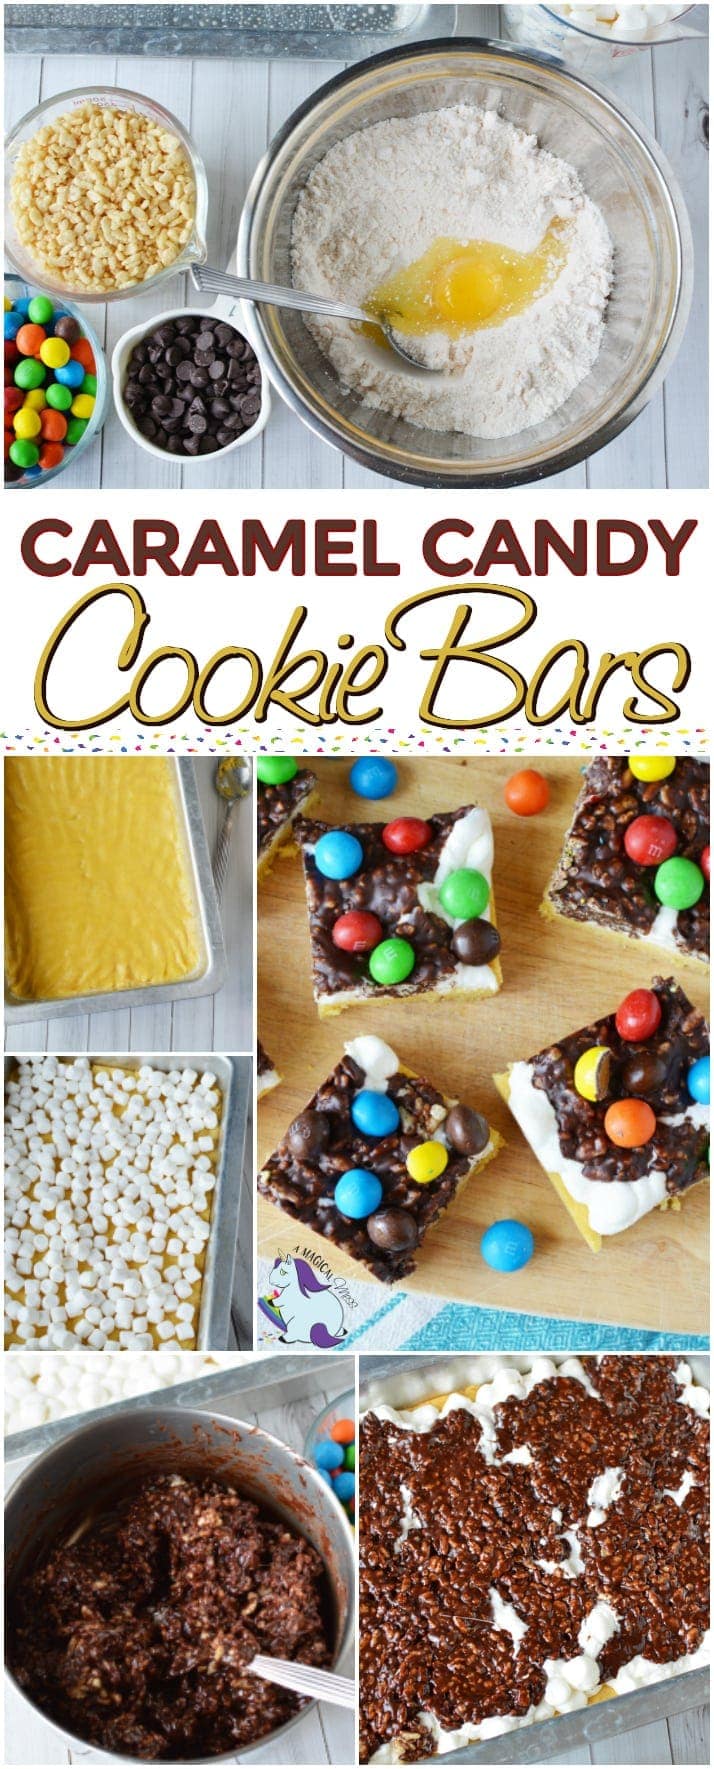 Caramel Cookie Bar Recipe - Layers of Deliciousness